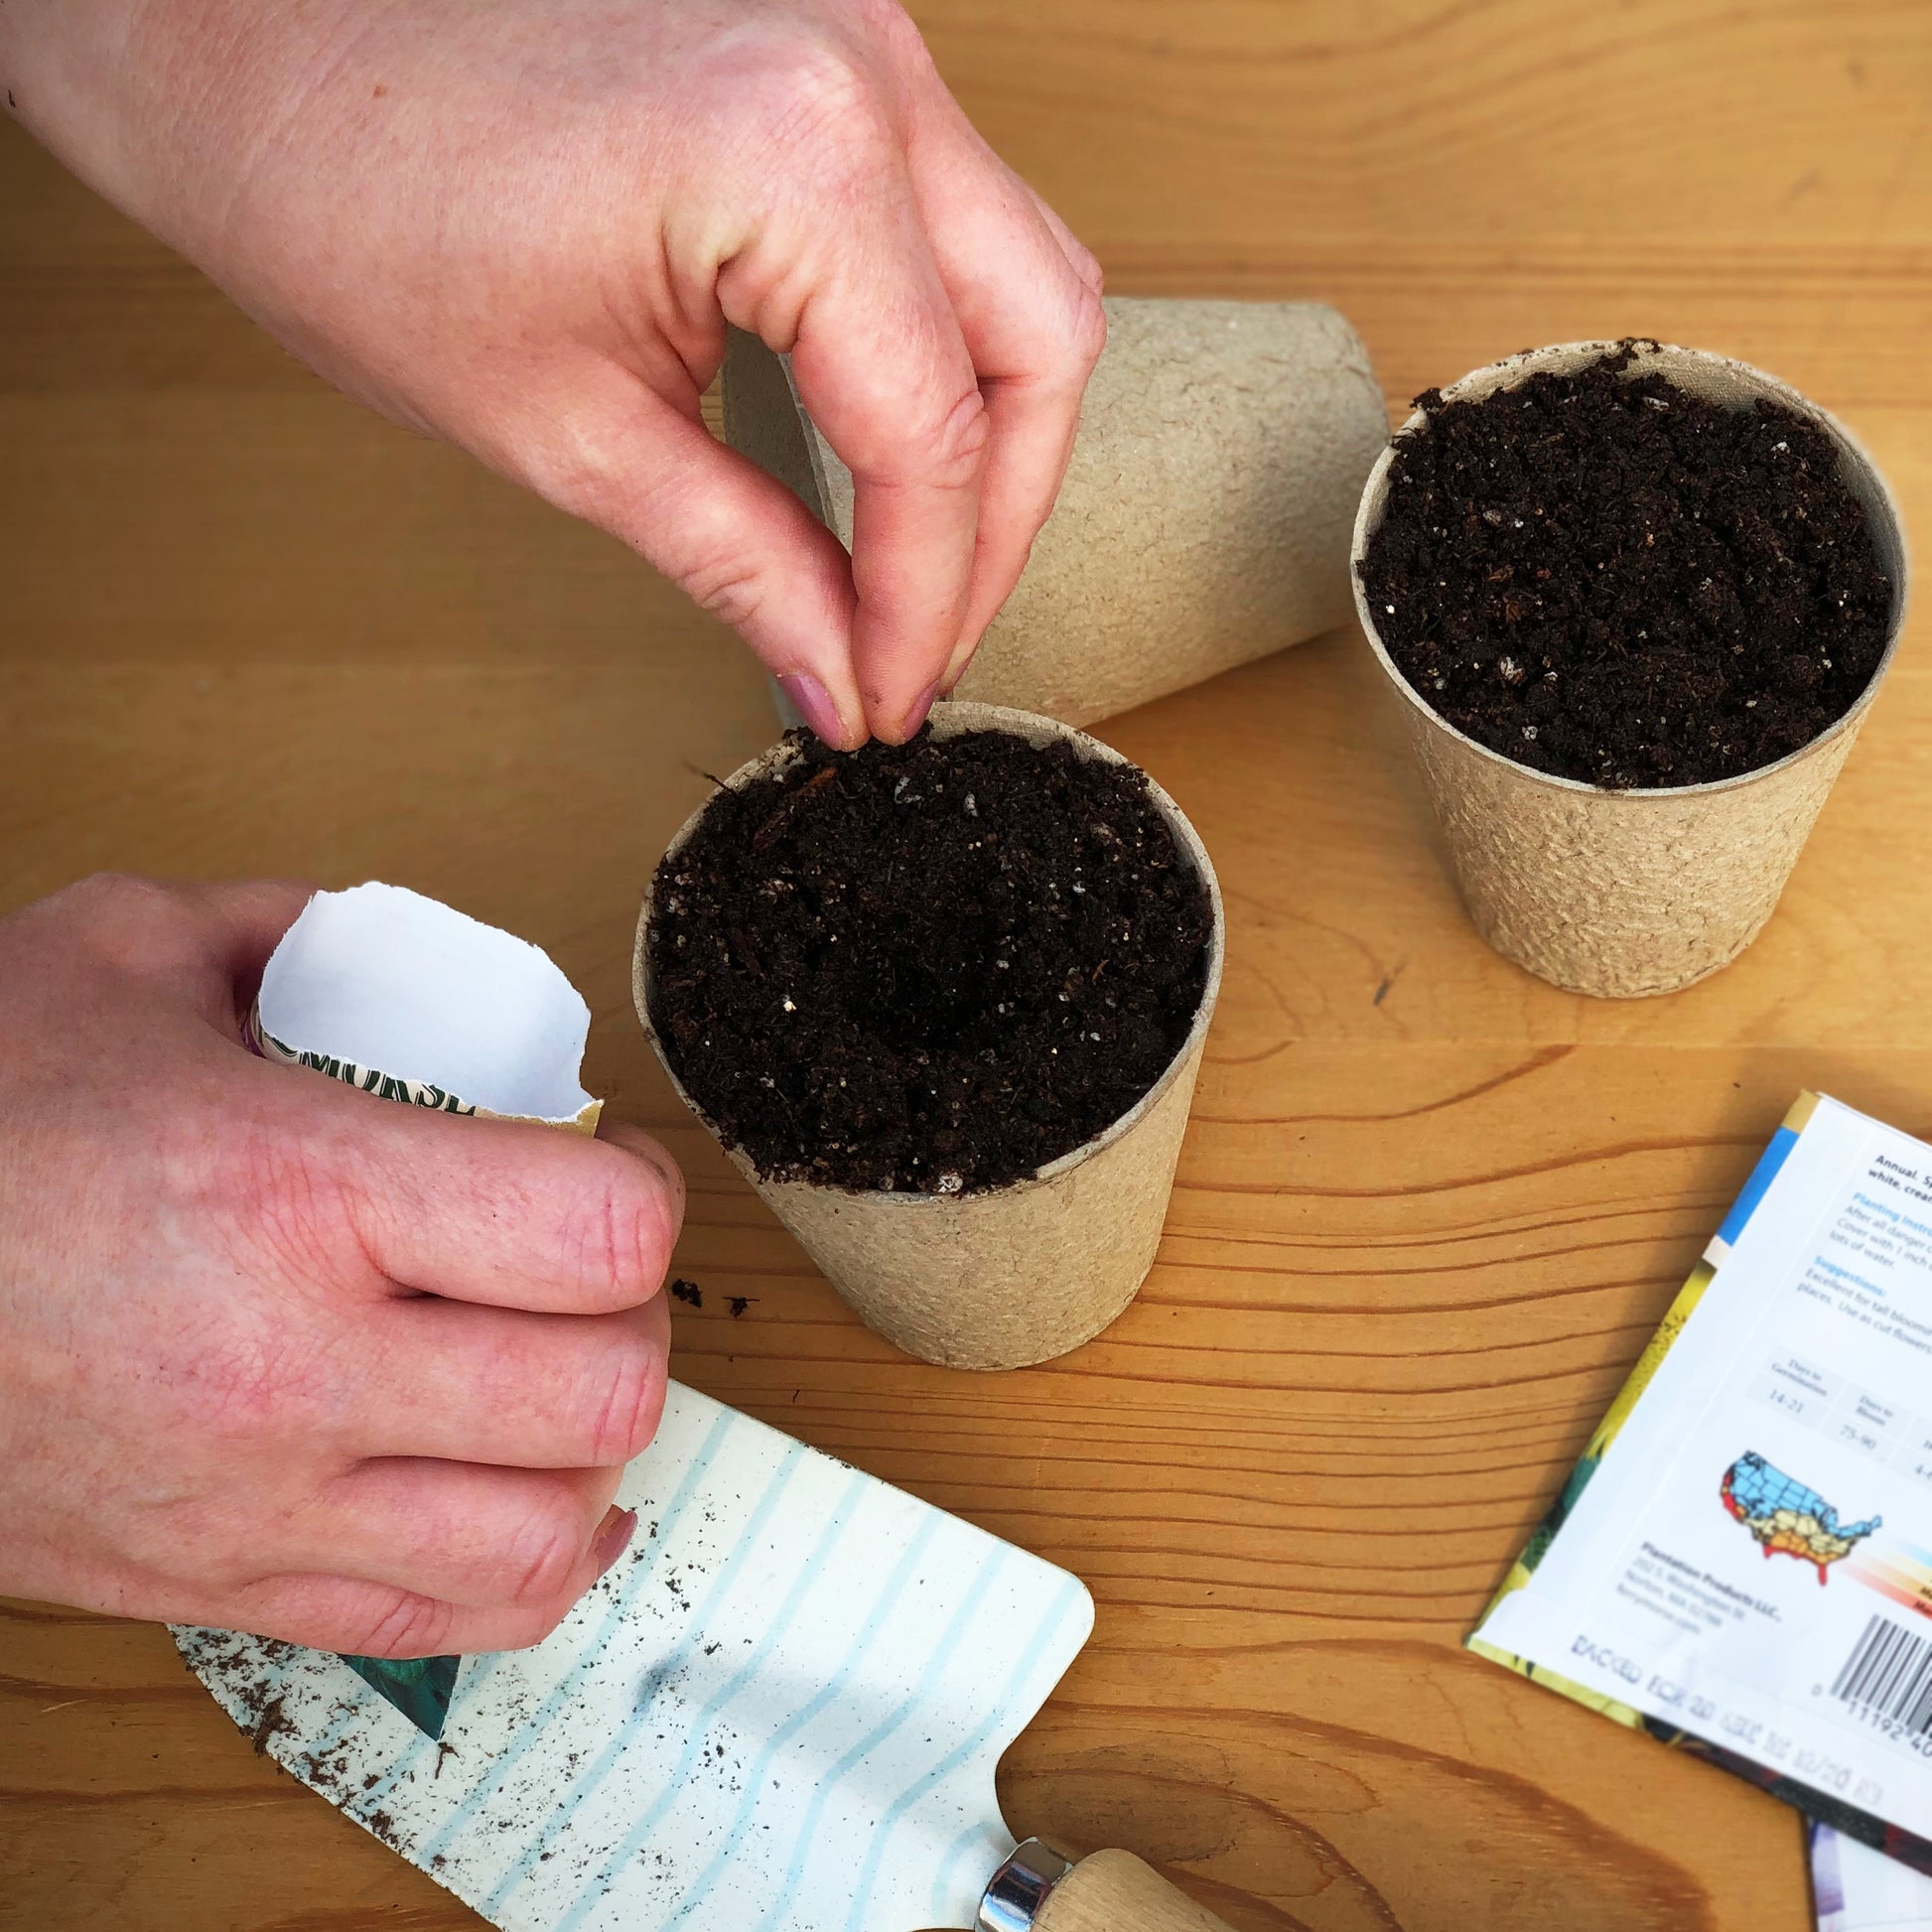 Start your Serrano Chili Peppers seeds in biodegradable peat or paper pots with sowing mix.